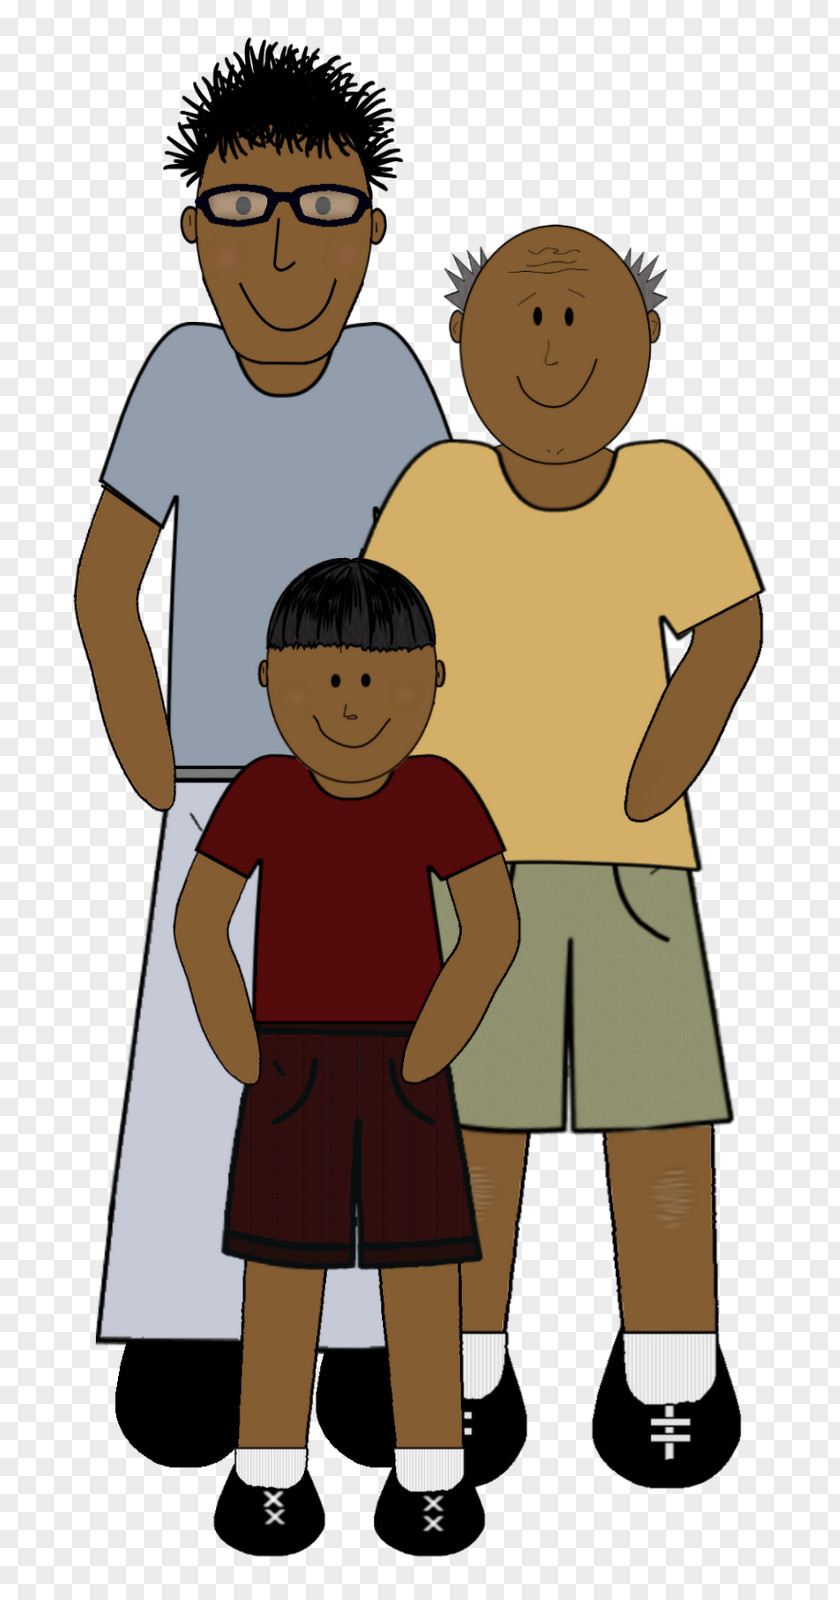 Fathers Day Background Wood Dos Pais T-shirt Human Behavior Clip Art Illustration PNG